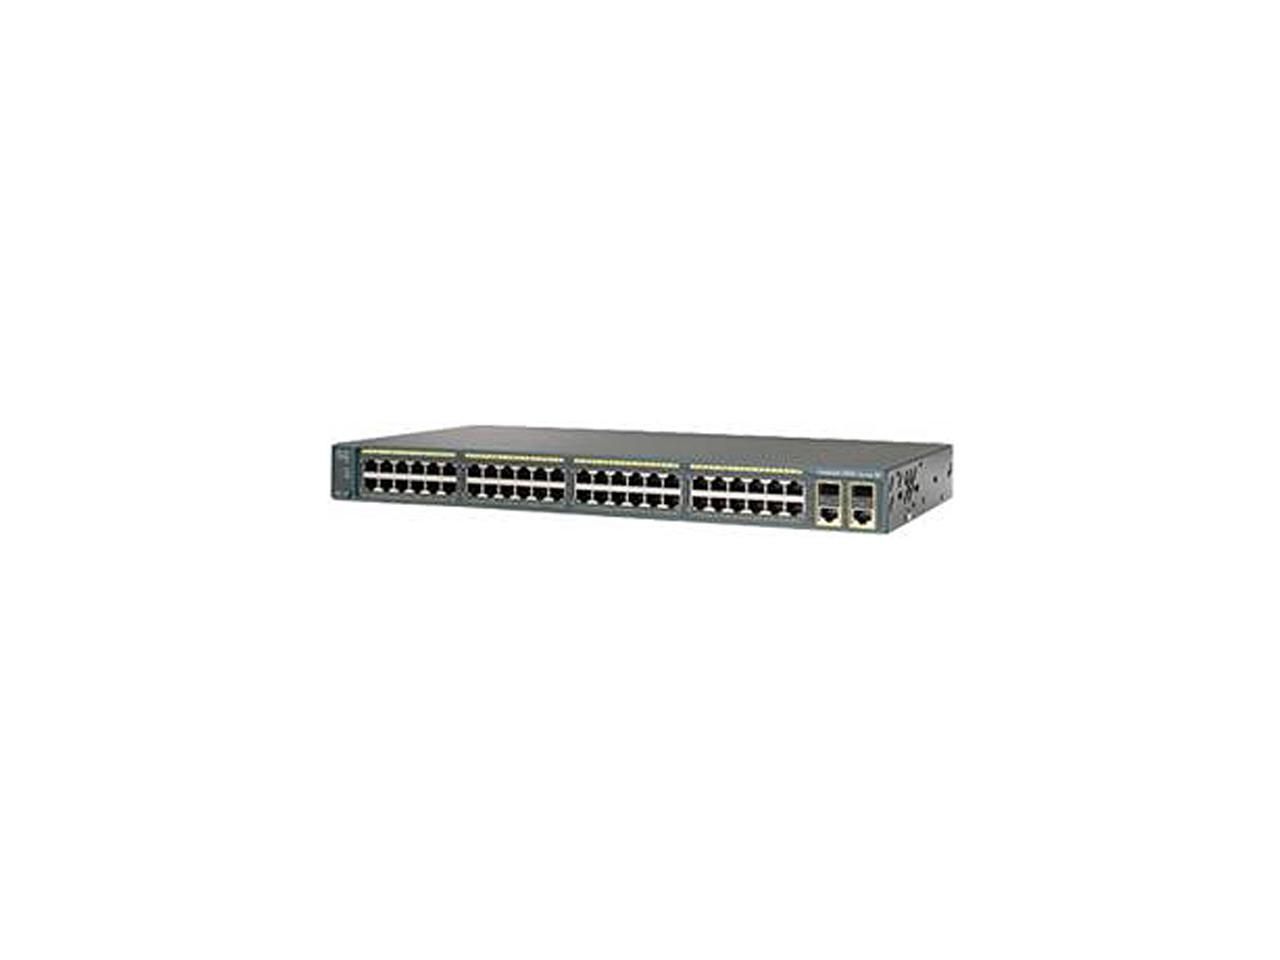 Cisco 24 Ports Catalyst 3 Layer Supported Ethernet Switch Model WS-C2960XR-24PS-I